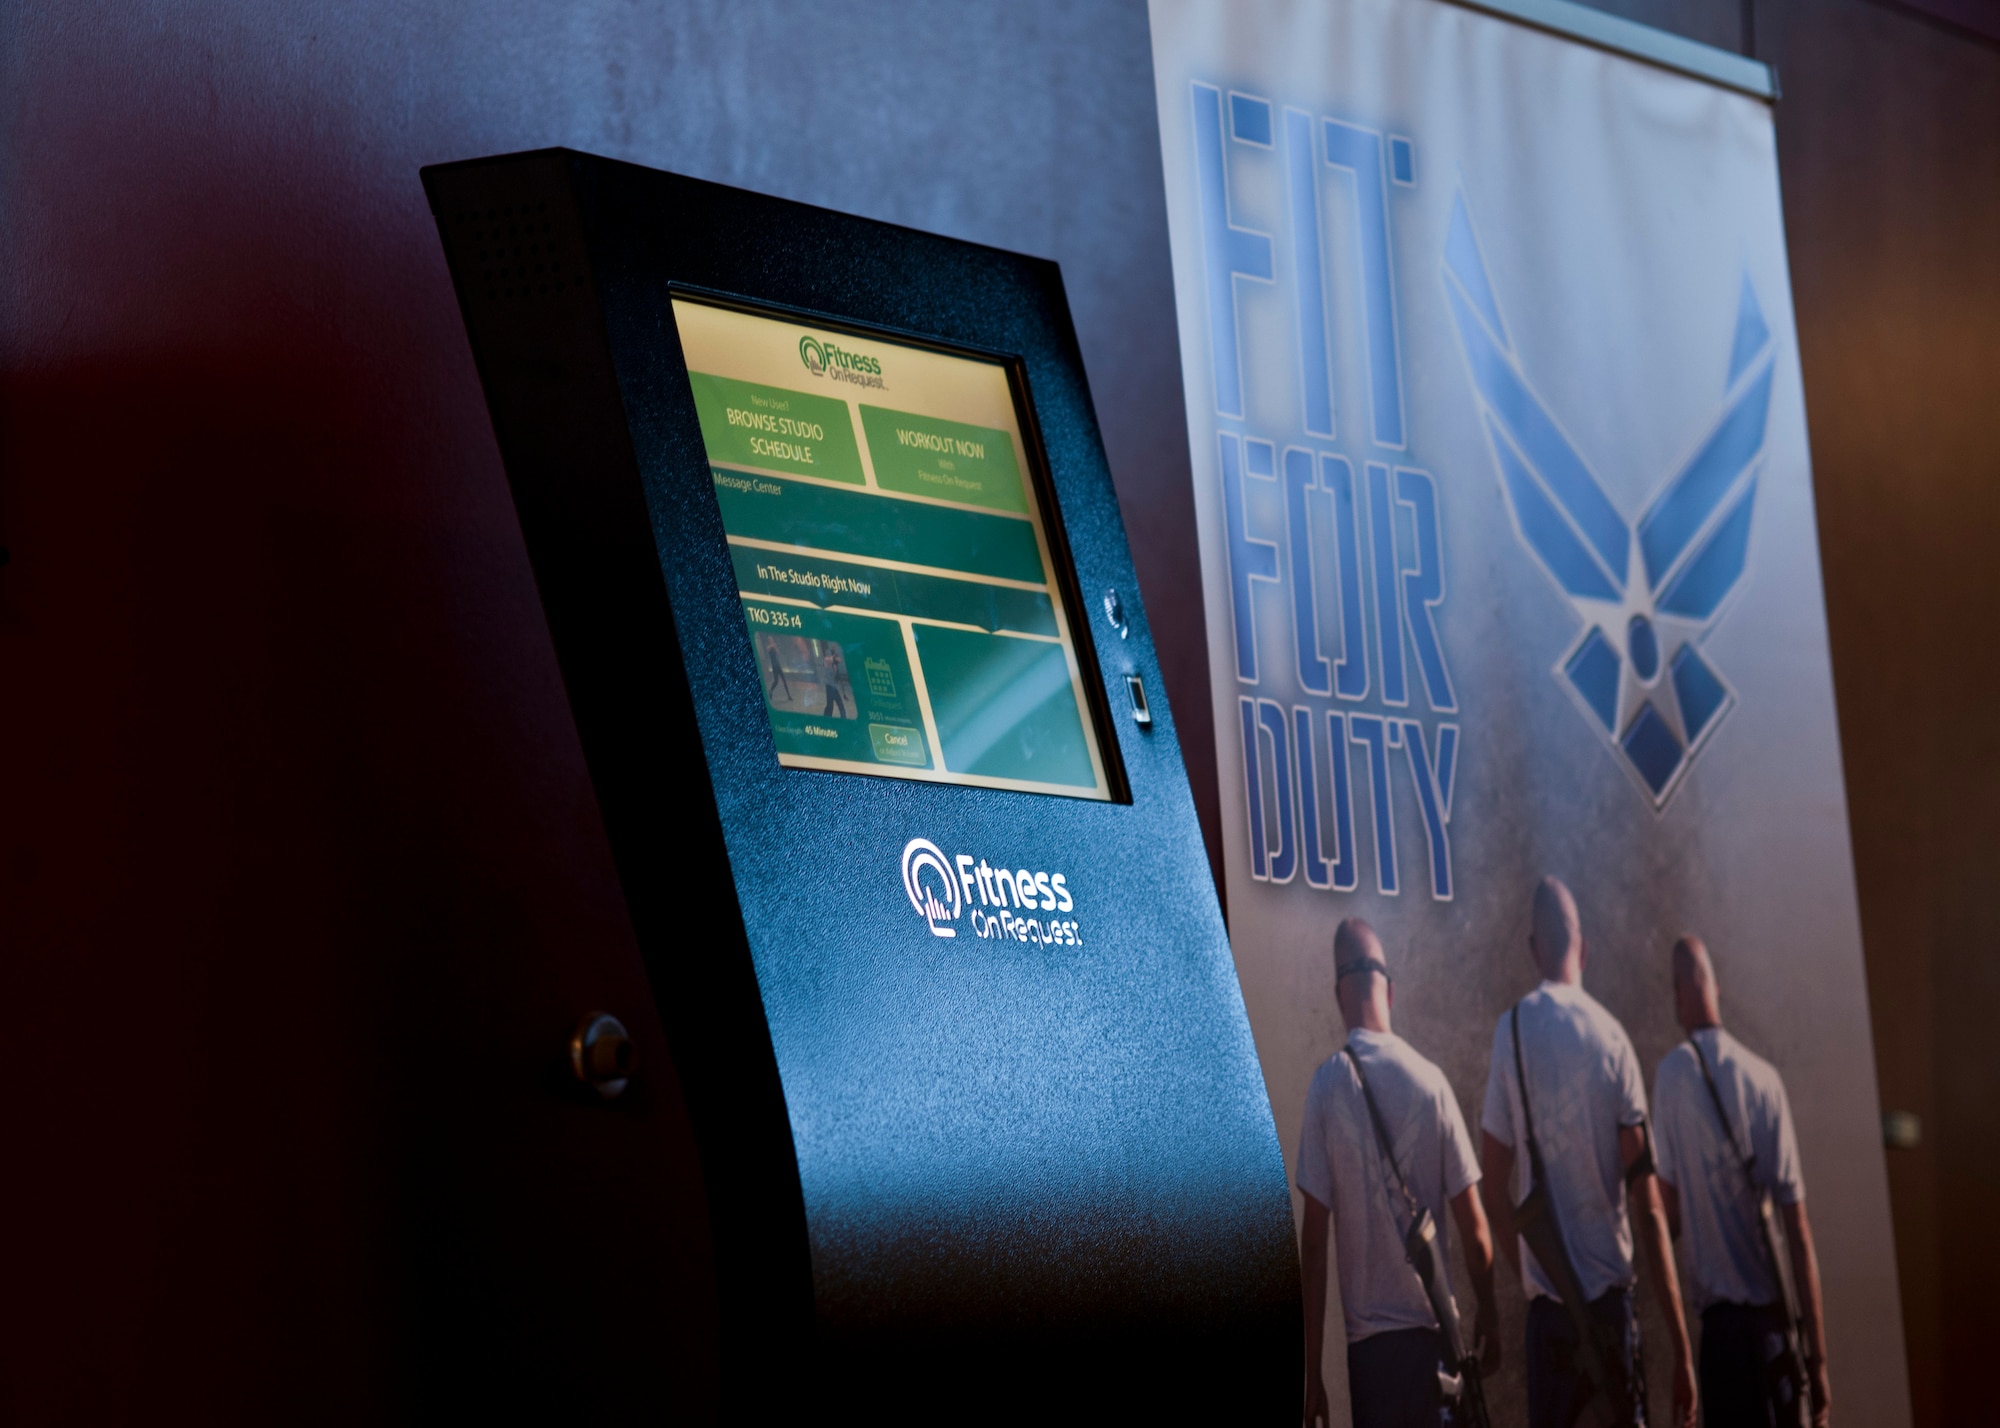 The 99th Force Support Squadron Warrior Fitness Center’s new "Fitness on Request" kiosks were recently activated Sept. 6, 2013, at Nellis Air Force Base, Nev. The kiosk enables fitness staff and customers to schedule group or individual exercise classes where exercise videos will play on a large screen located in the aerobics room. The Air Force plans to install similar kiosks at 66 locations by the end of September in order to help improve total force fitness levels as part of its Operational Fitness Program. (U.S. Air Force photo by Staff Sgt. Michael Charles)